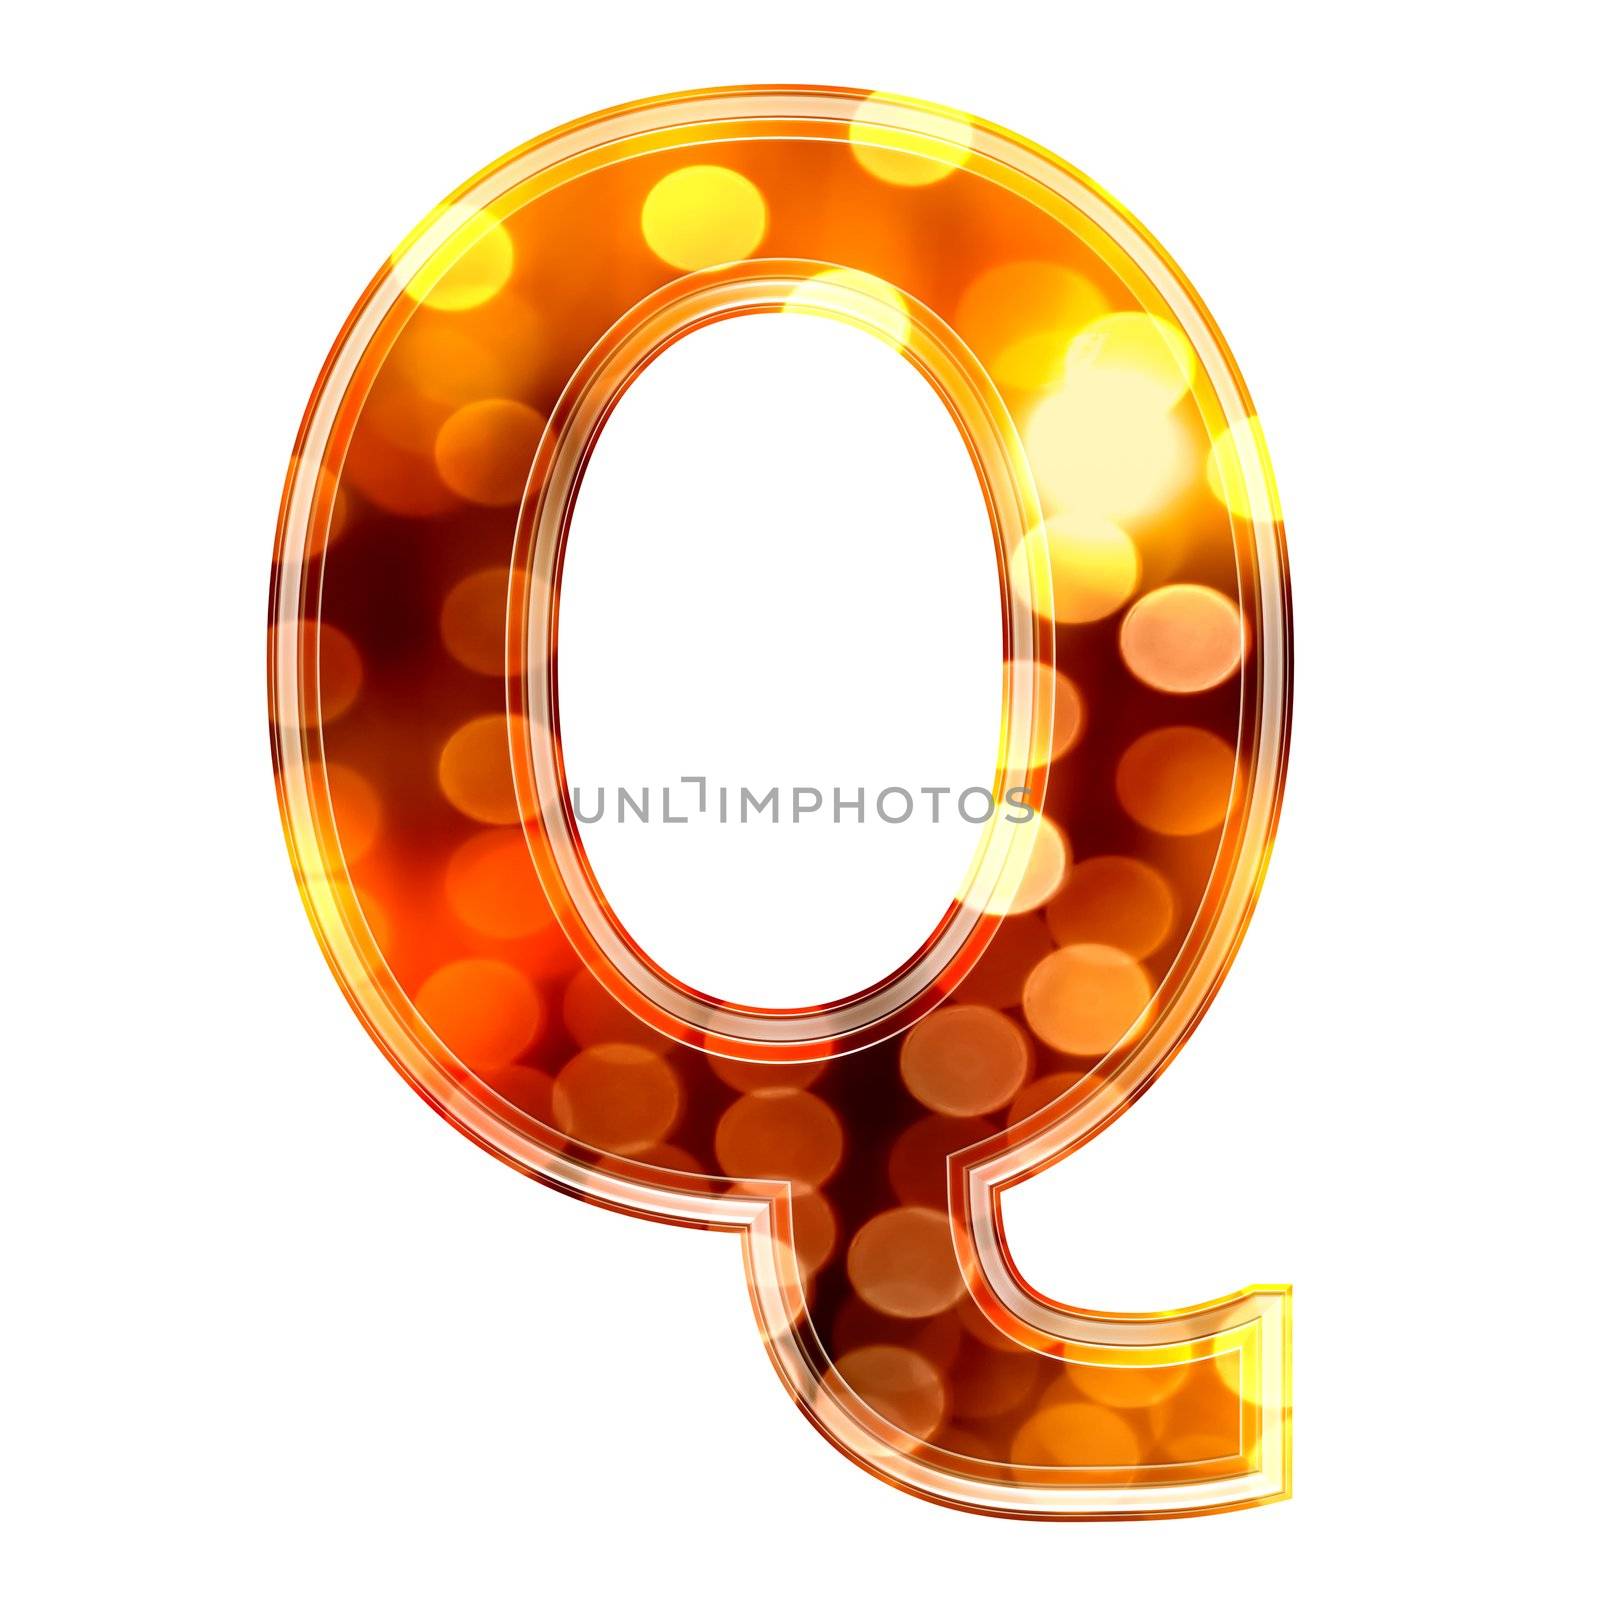 3d letter with glowing lights texture - Q by chrisroll